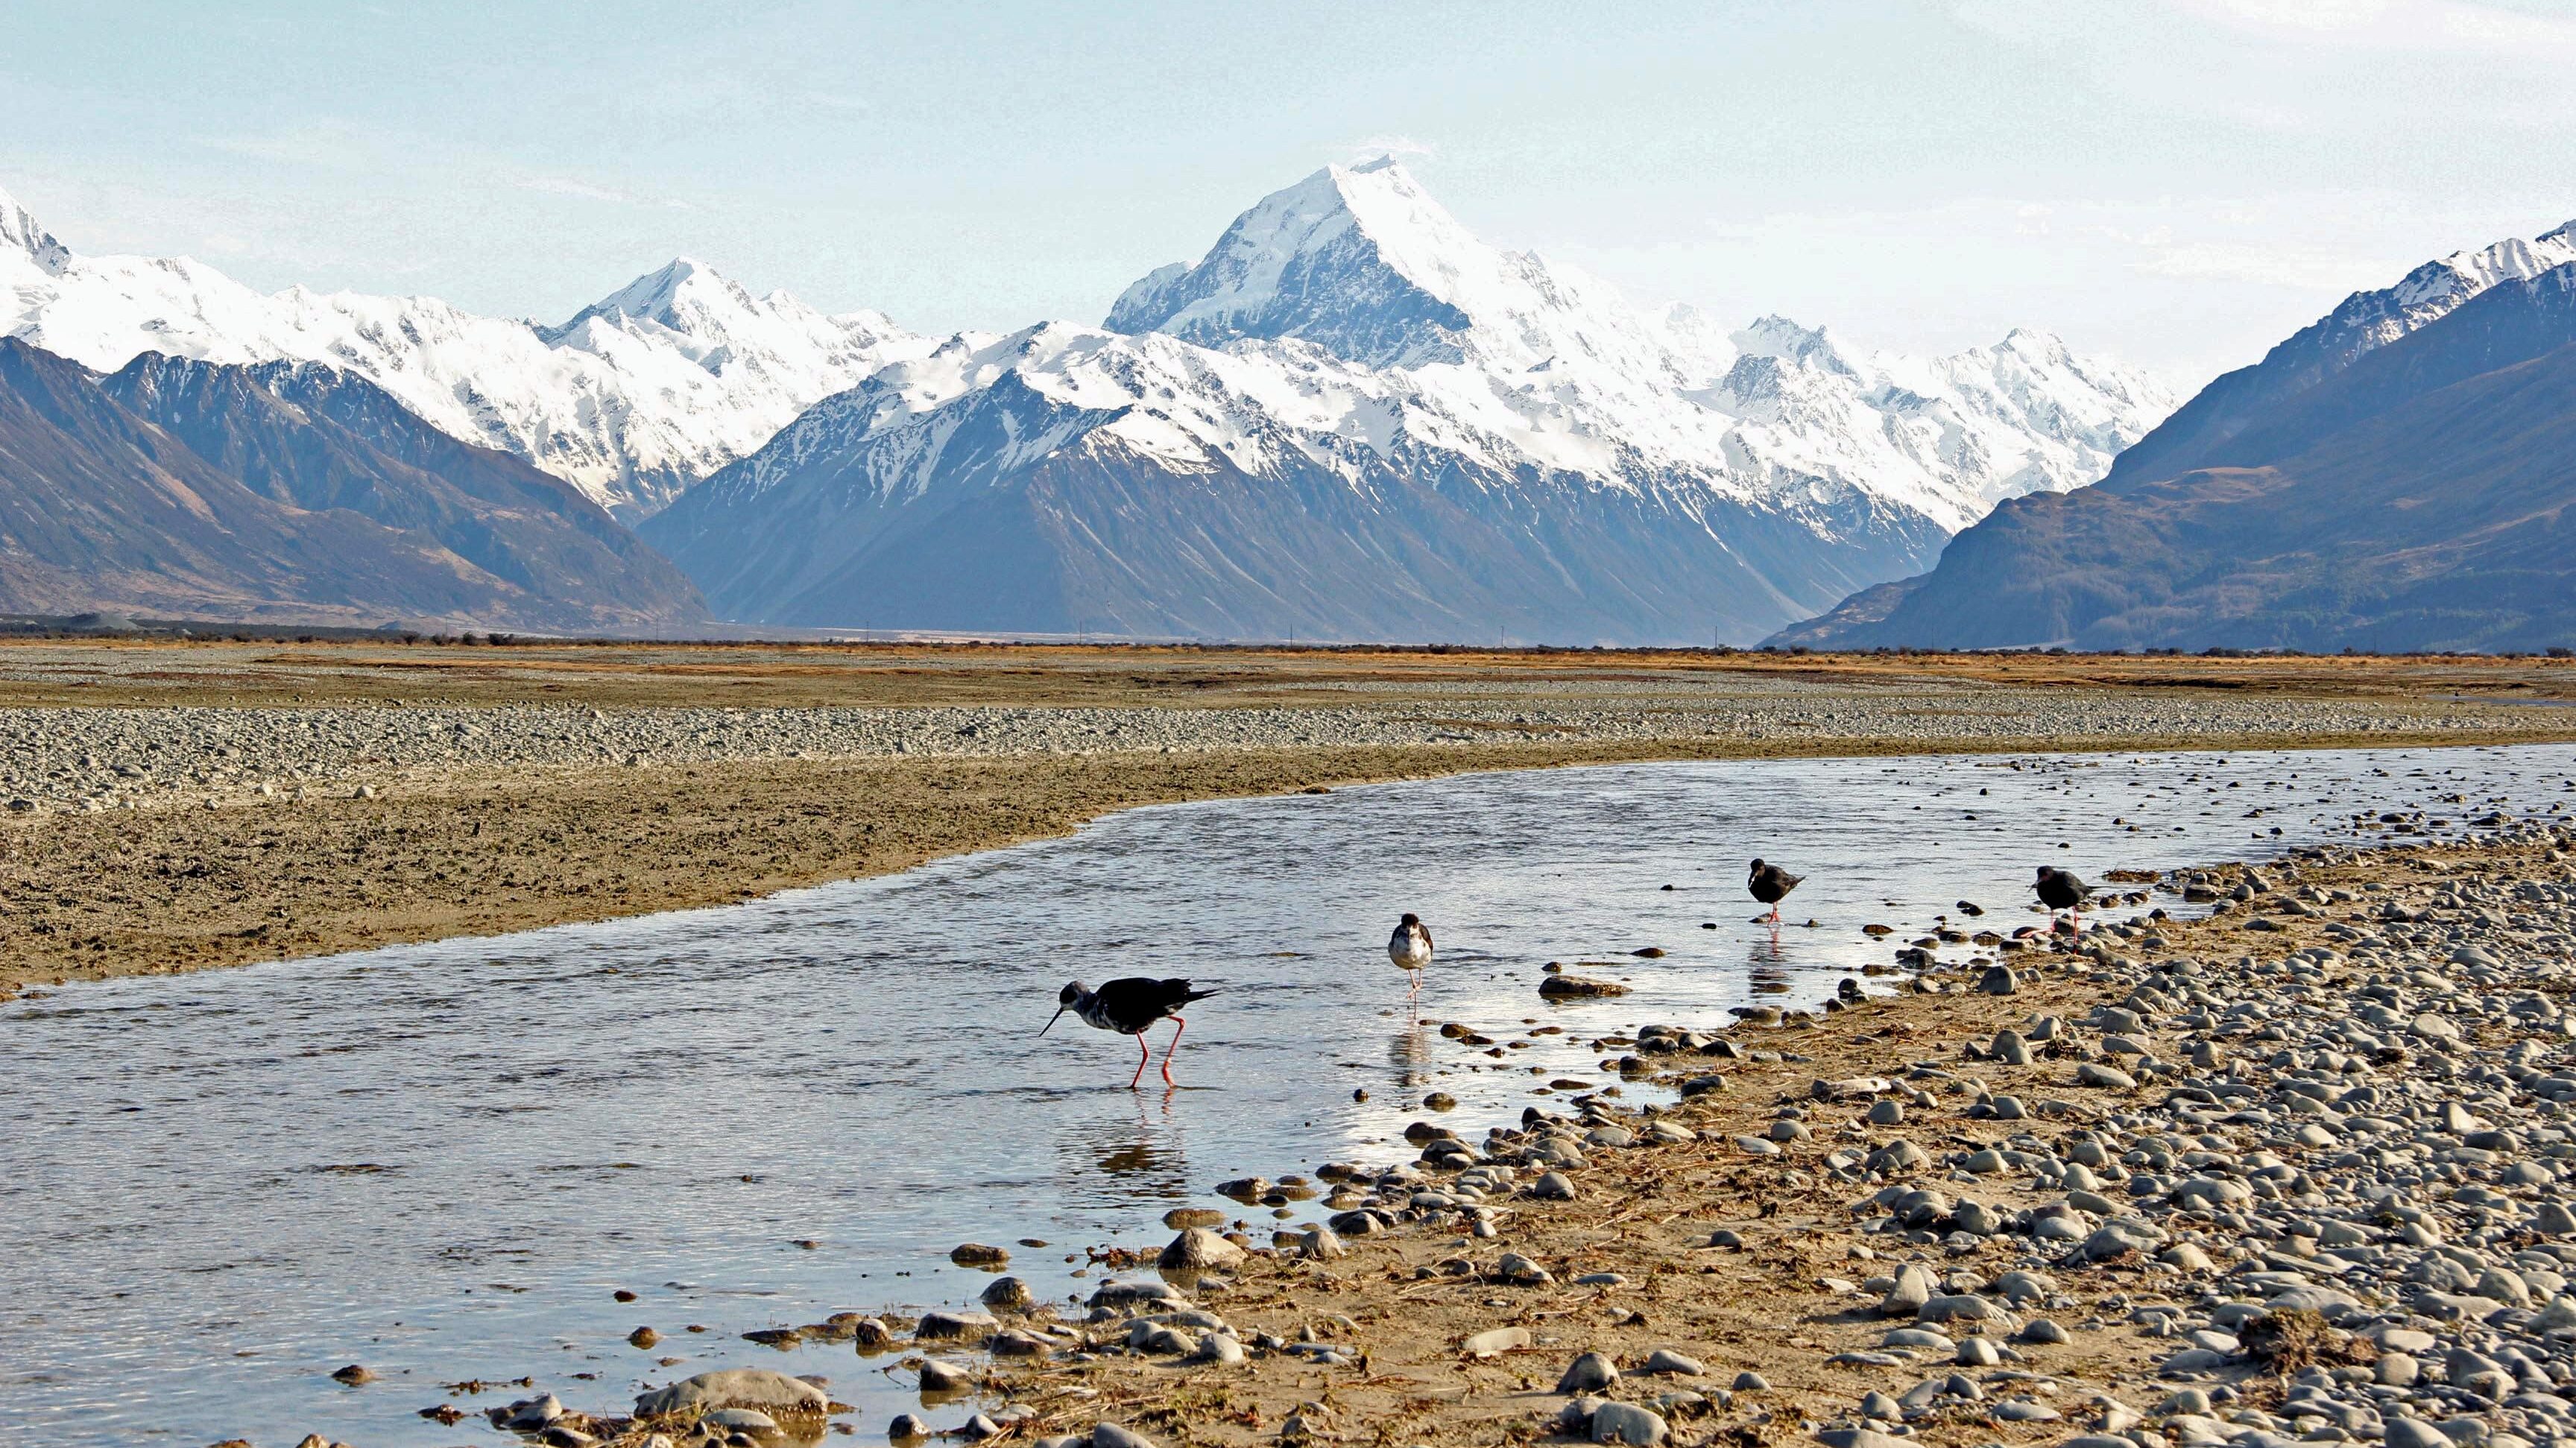 birds wading in a shallow stream with mountainous landscape in the distance